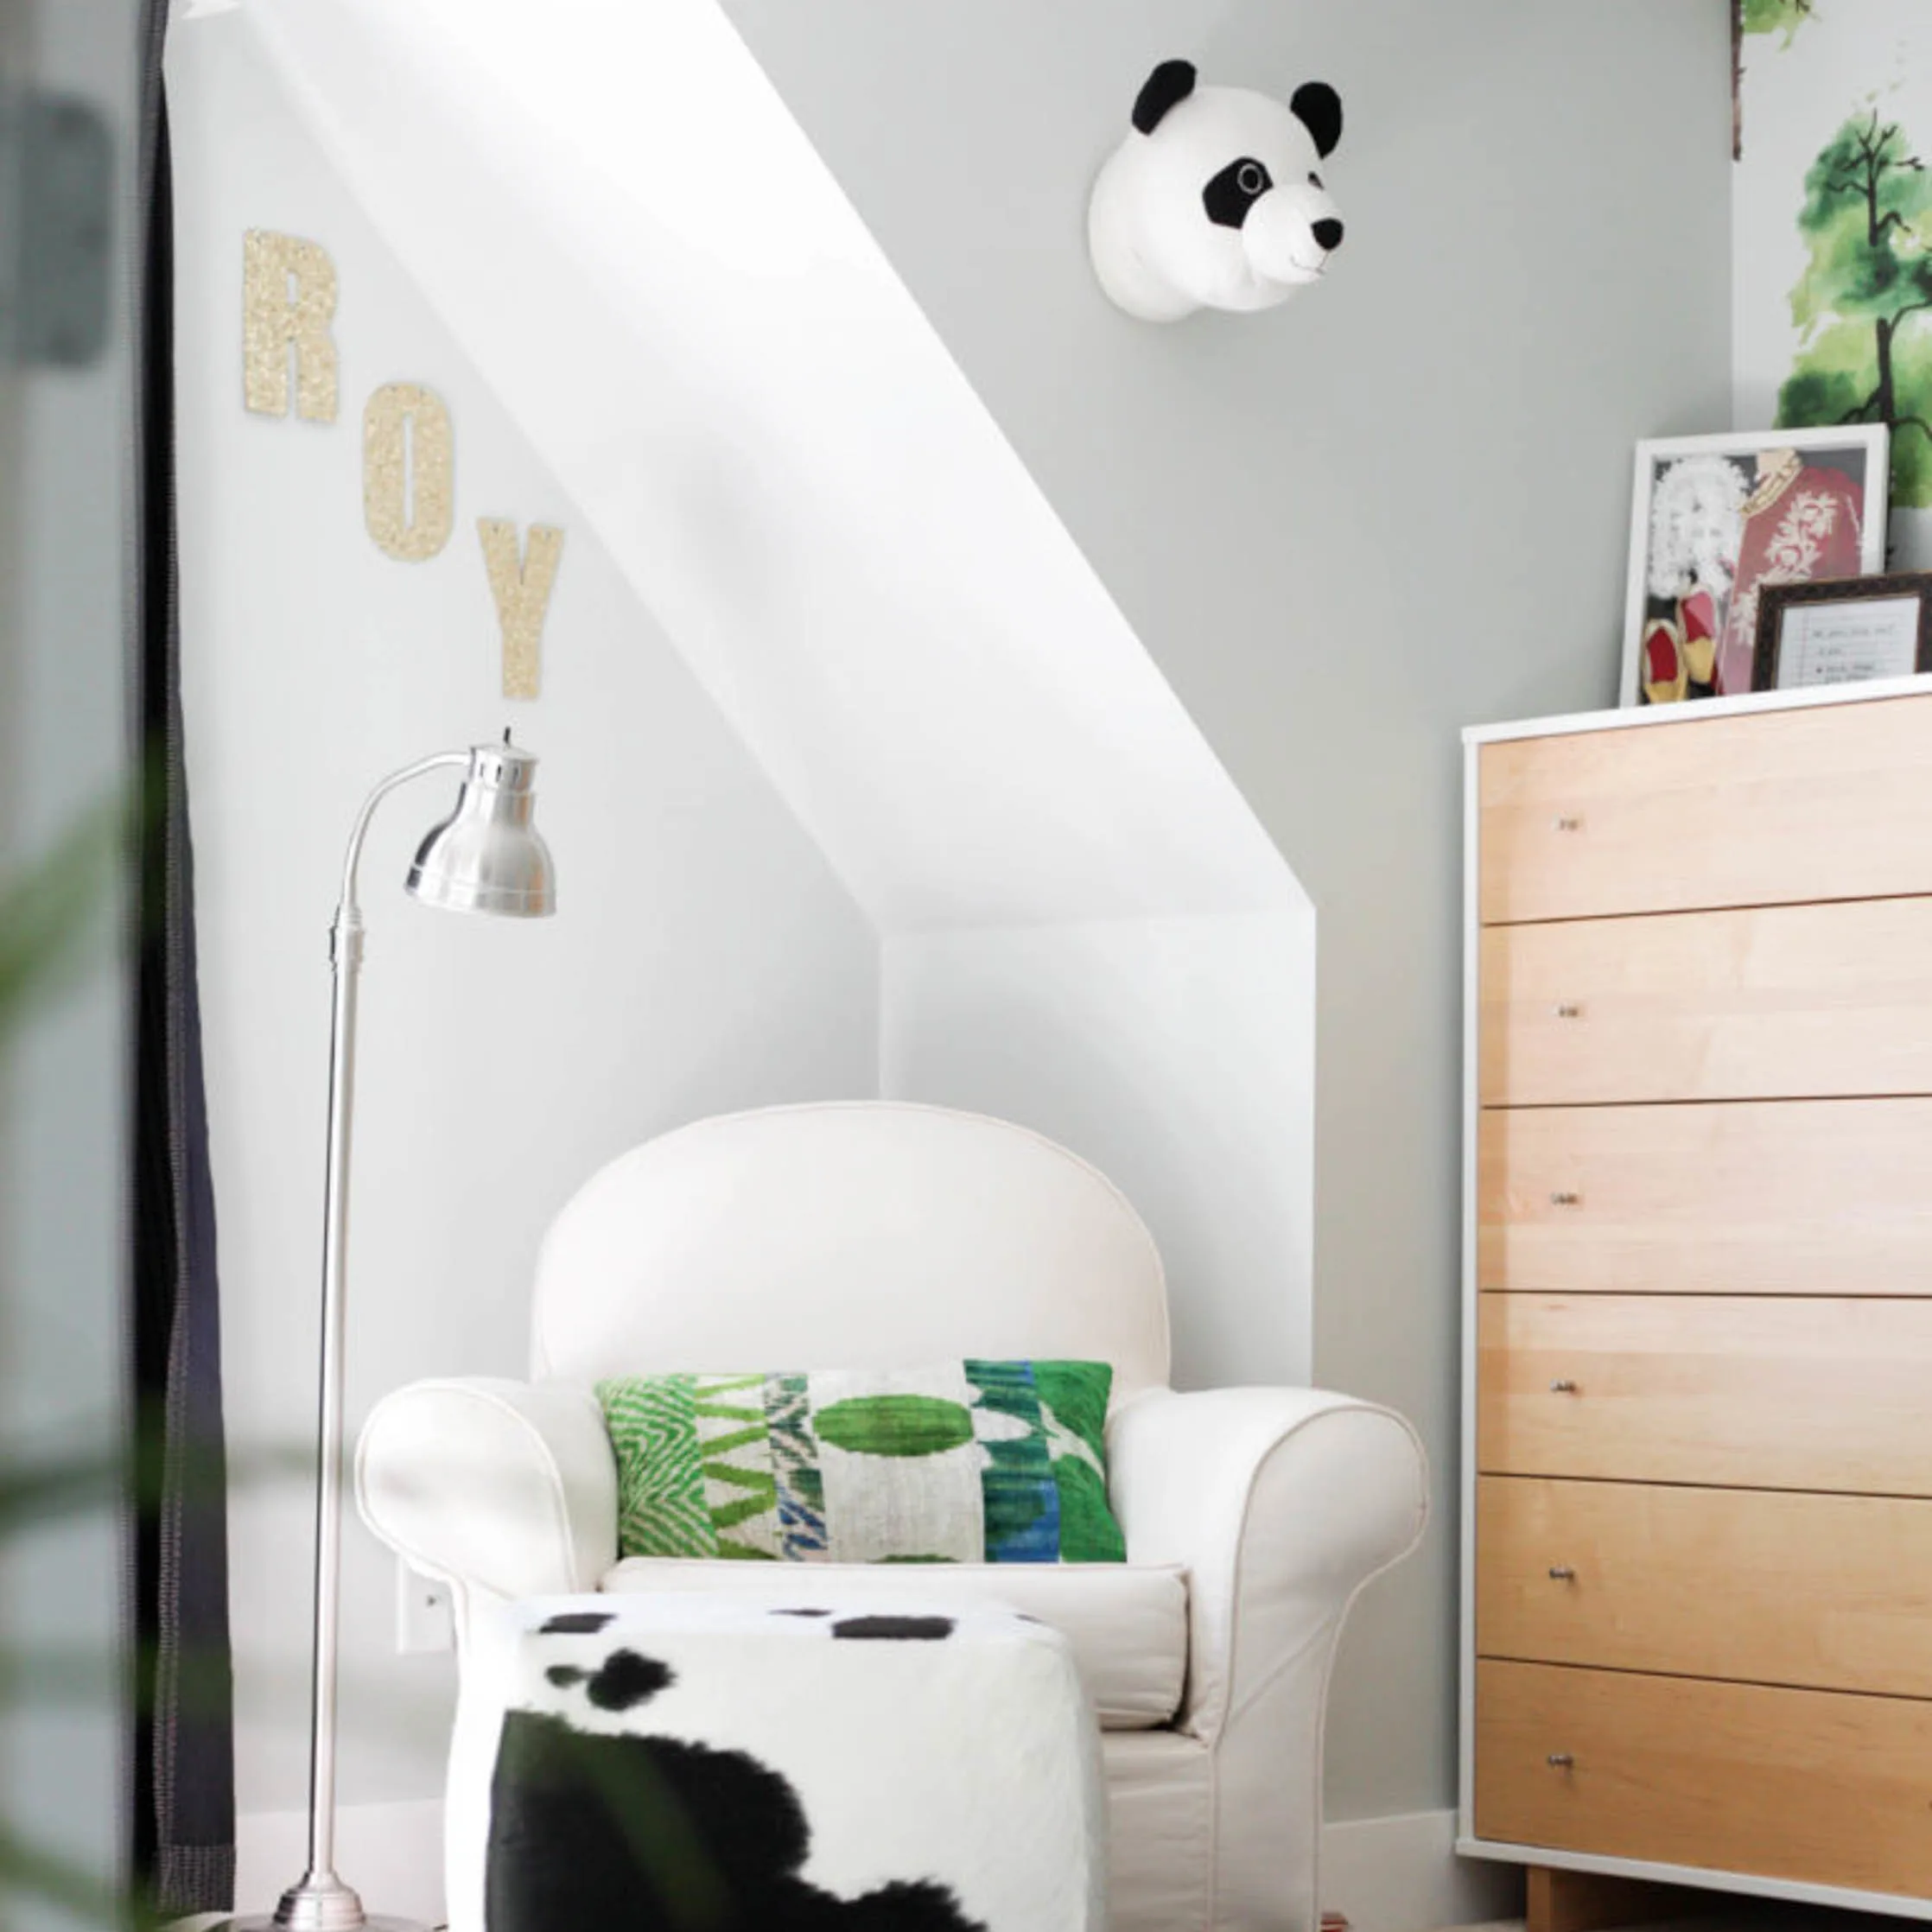 Eclectic and Playful Kid's Room